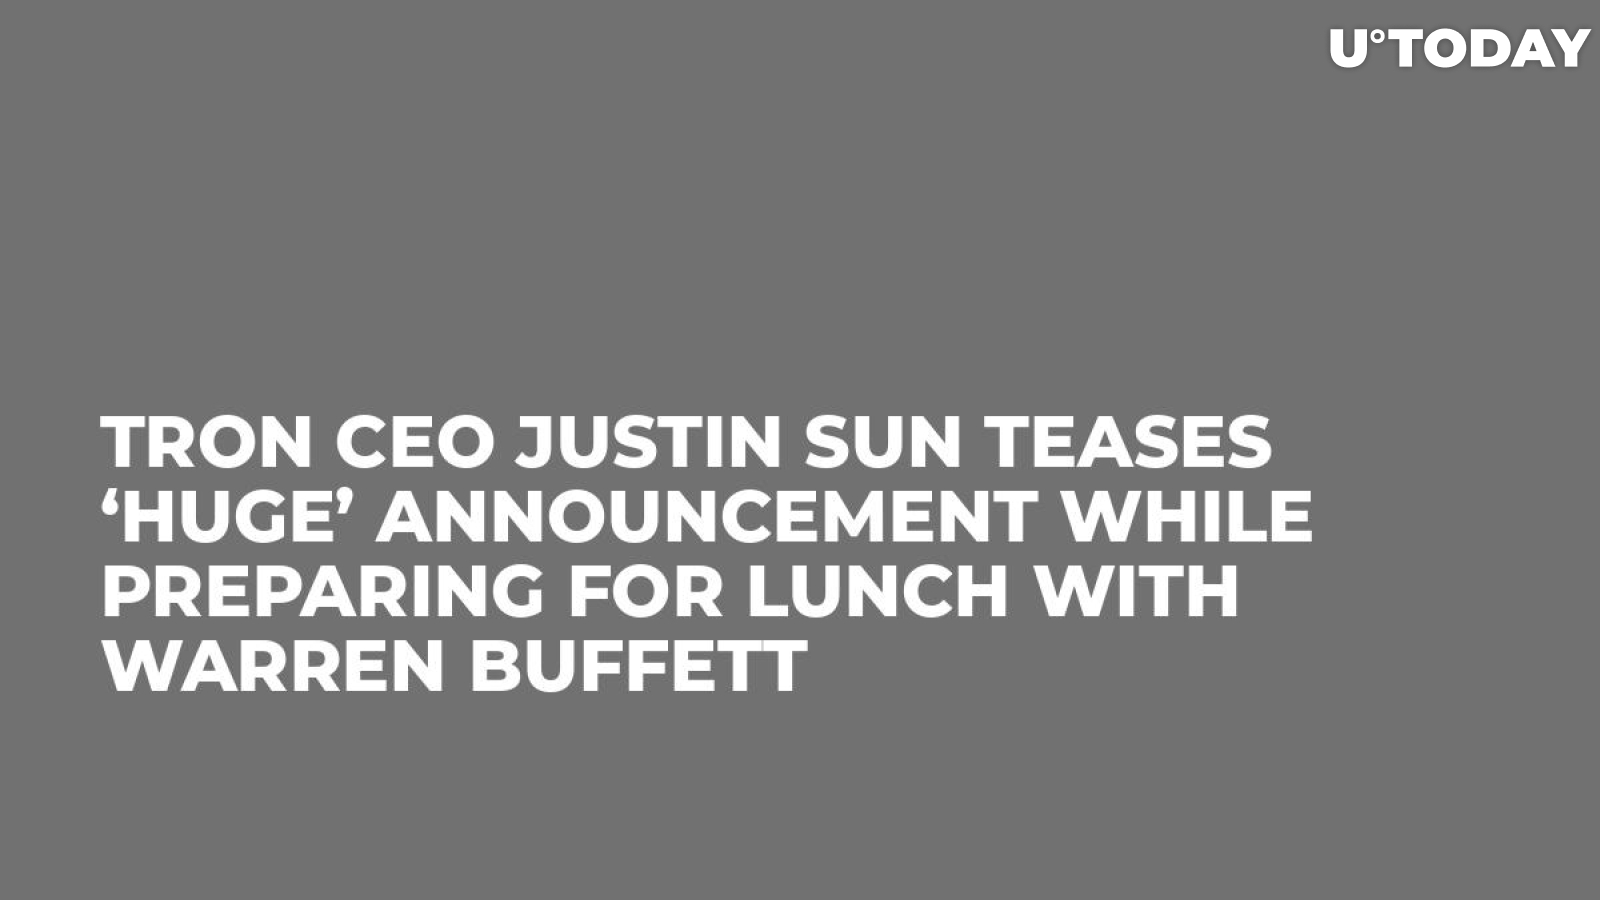 Tron CEO Justin Sun Teases ‘Huge’ Announcement While Preparing for Lunch with Warren Buffett   